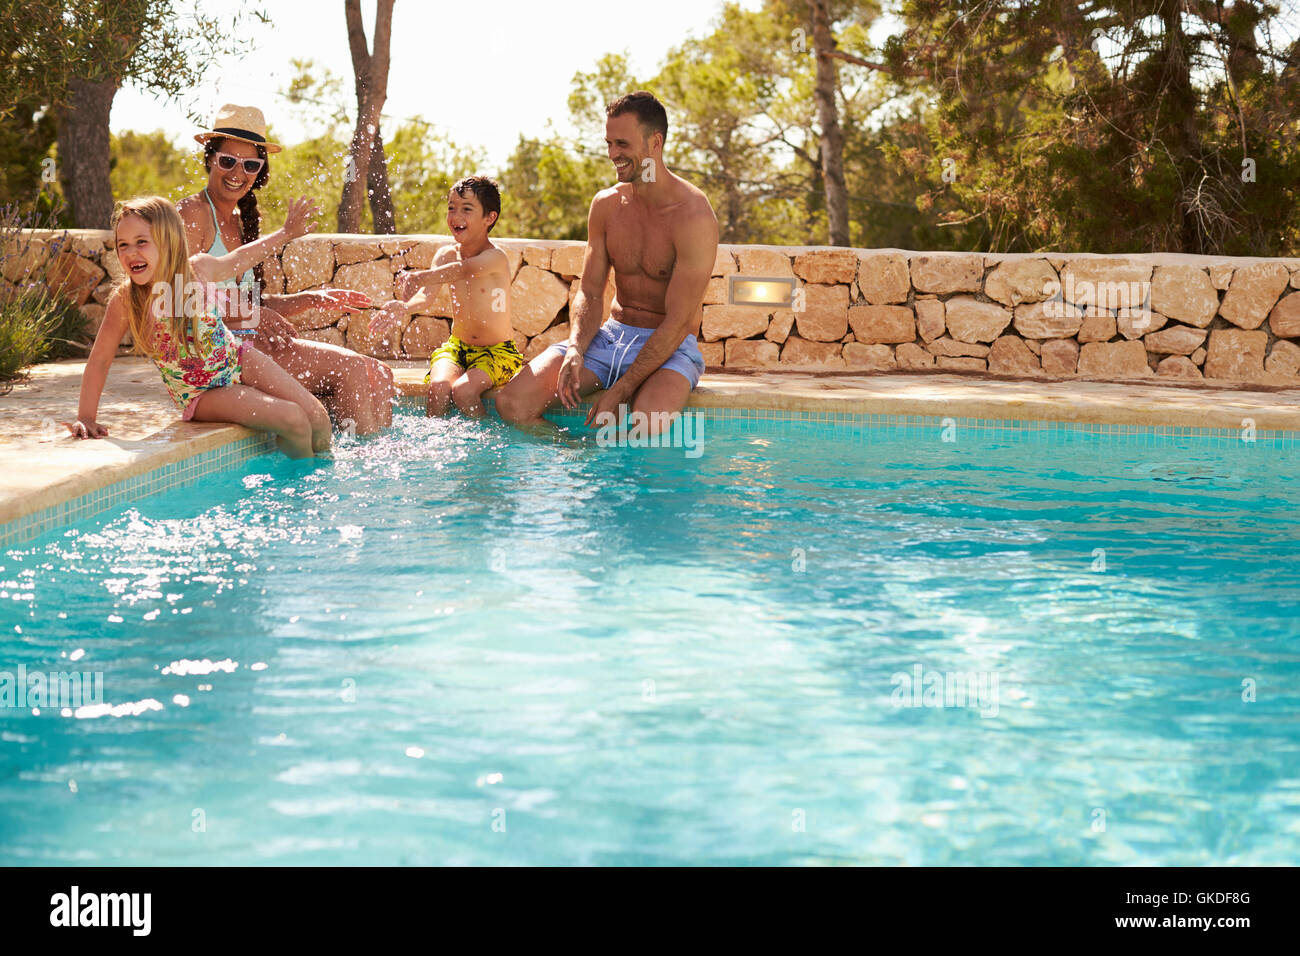 Wide Angle View Of Family On Vacation Having Fun By Pool Stock Photo